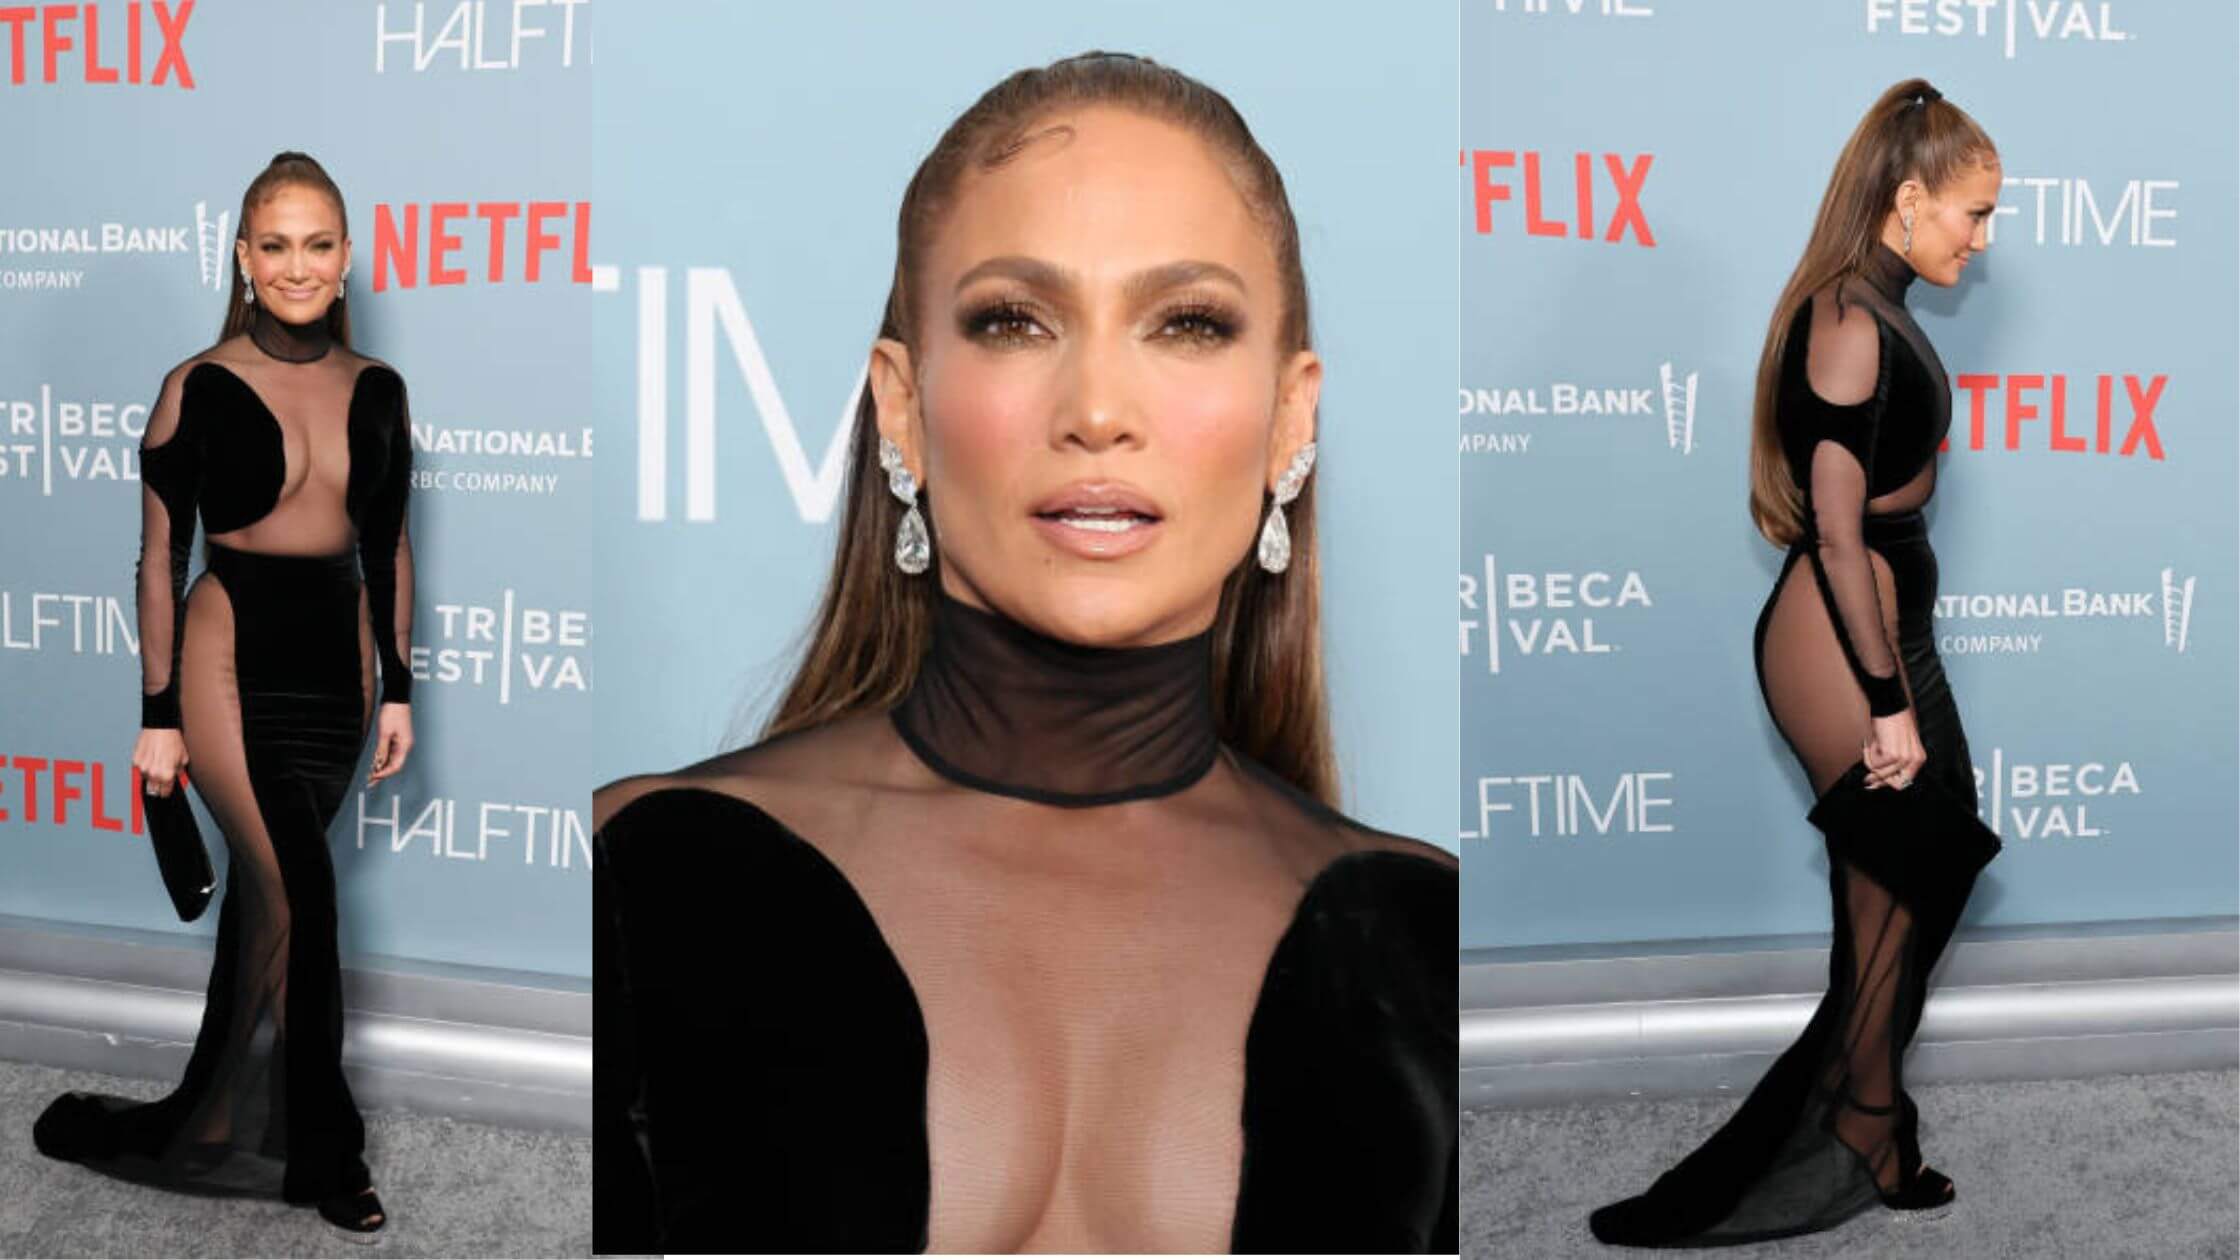 Jennifer Lopez  Appeared Halftime Premiere In Dazzling Black And Sheer Gown 